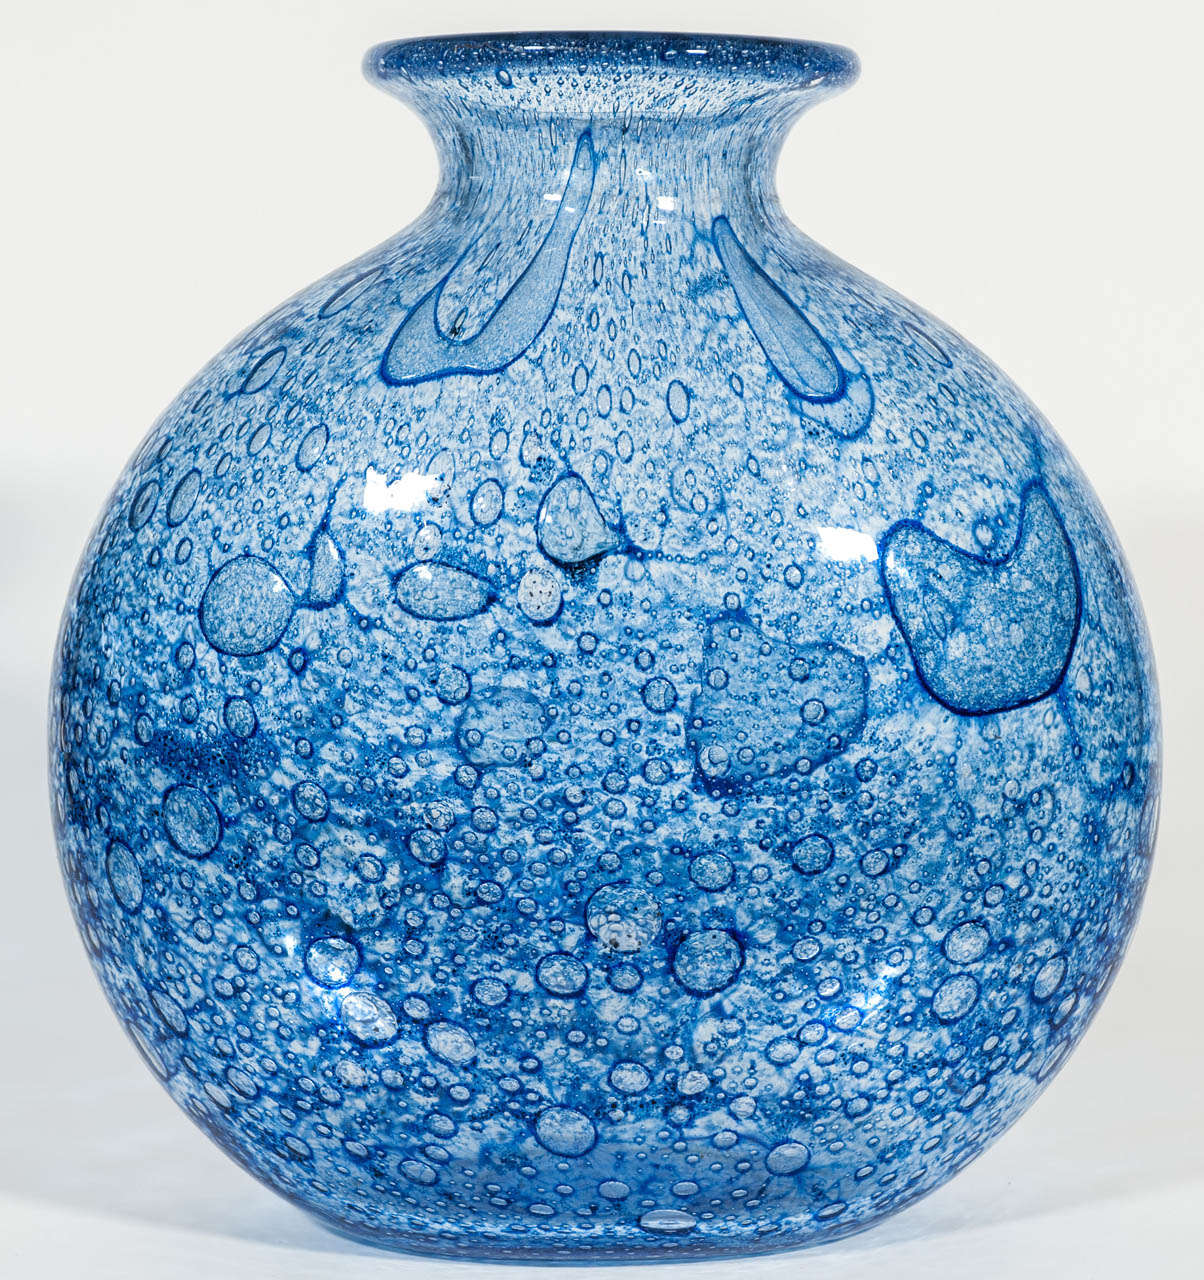 Ercole Barovier Efeso vase, clear glass with blue inclusions.